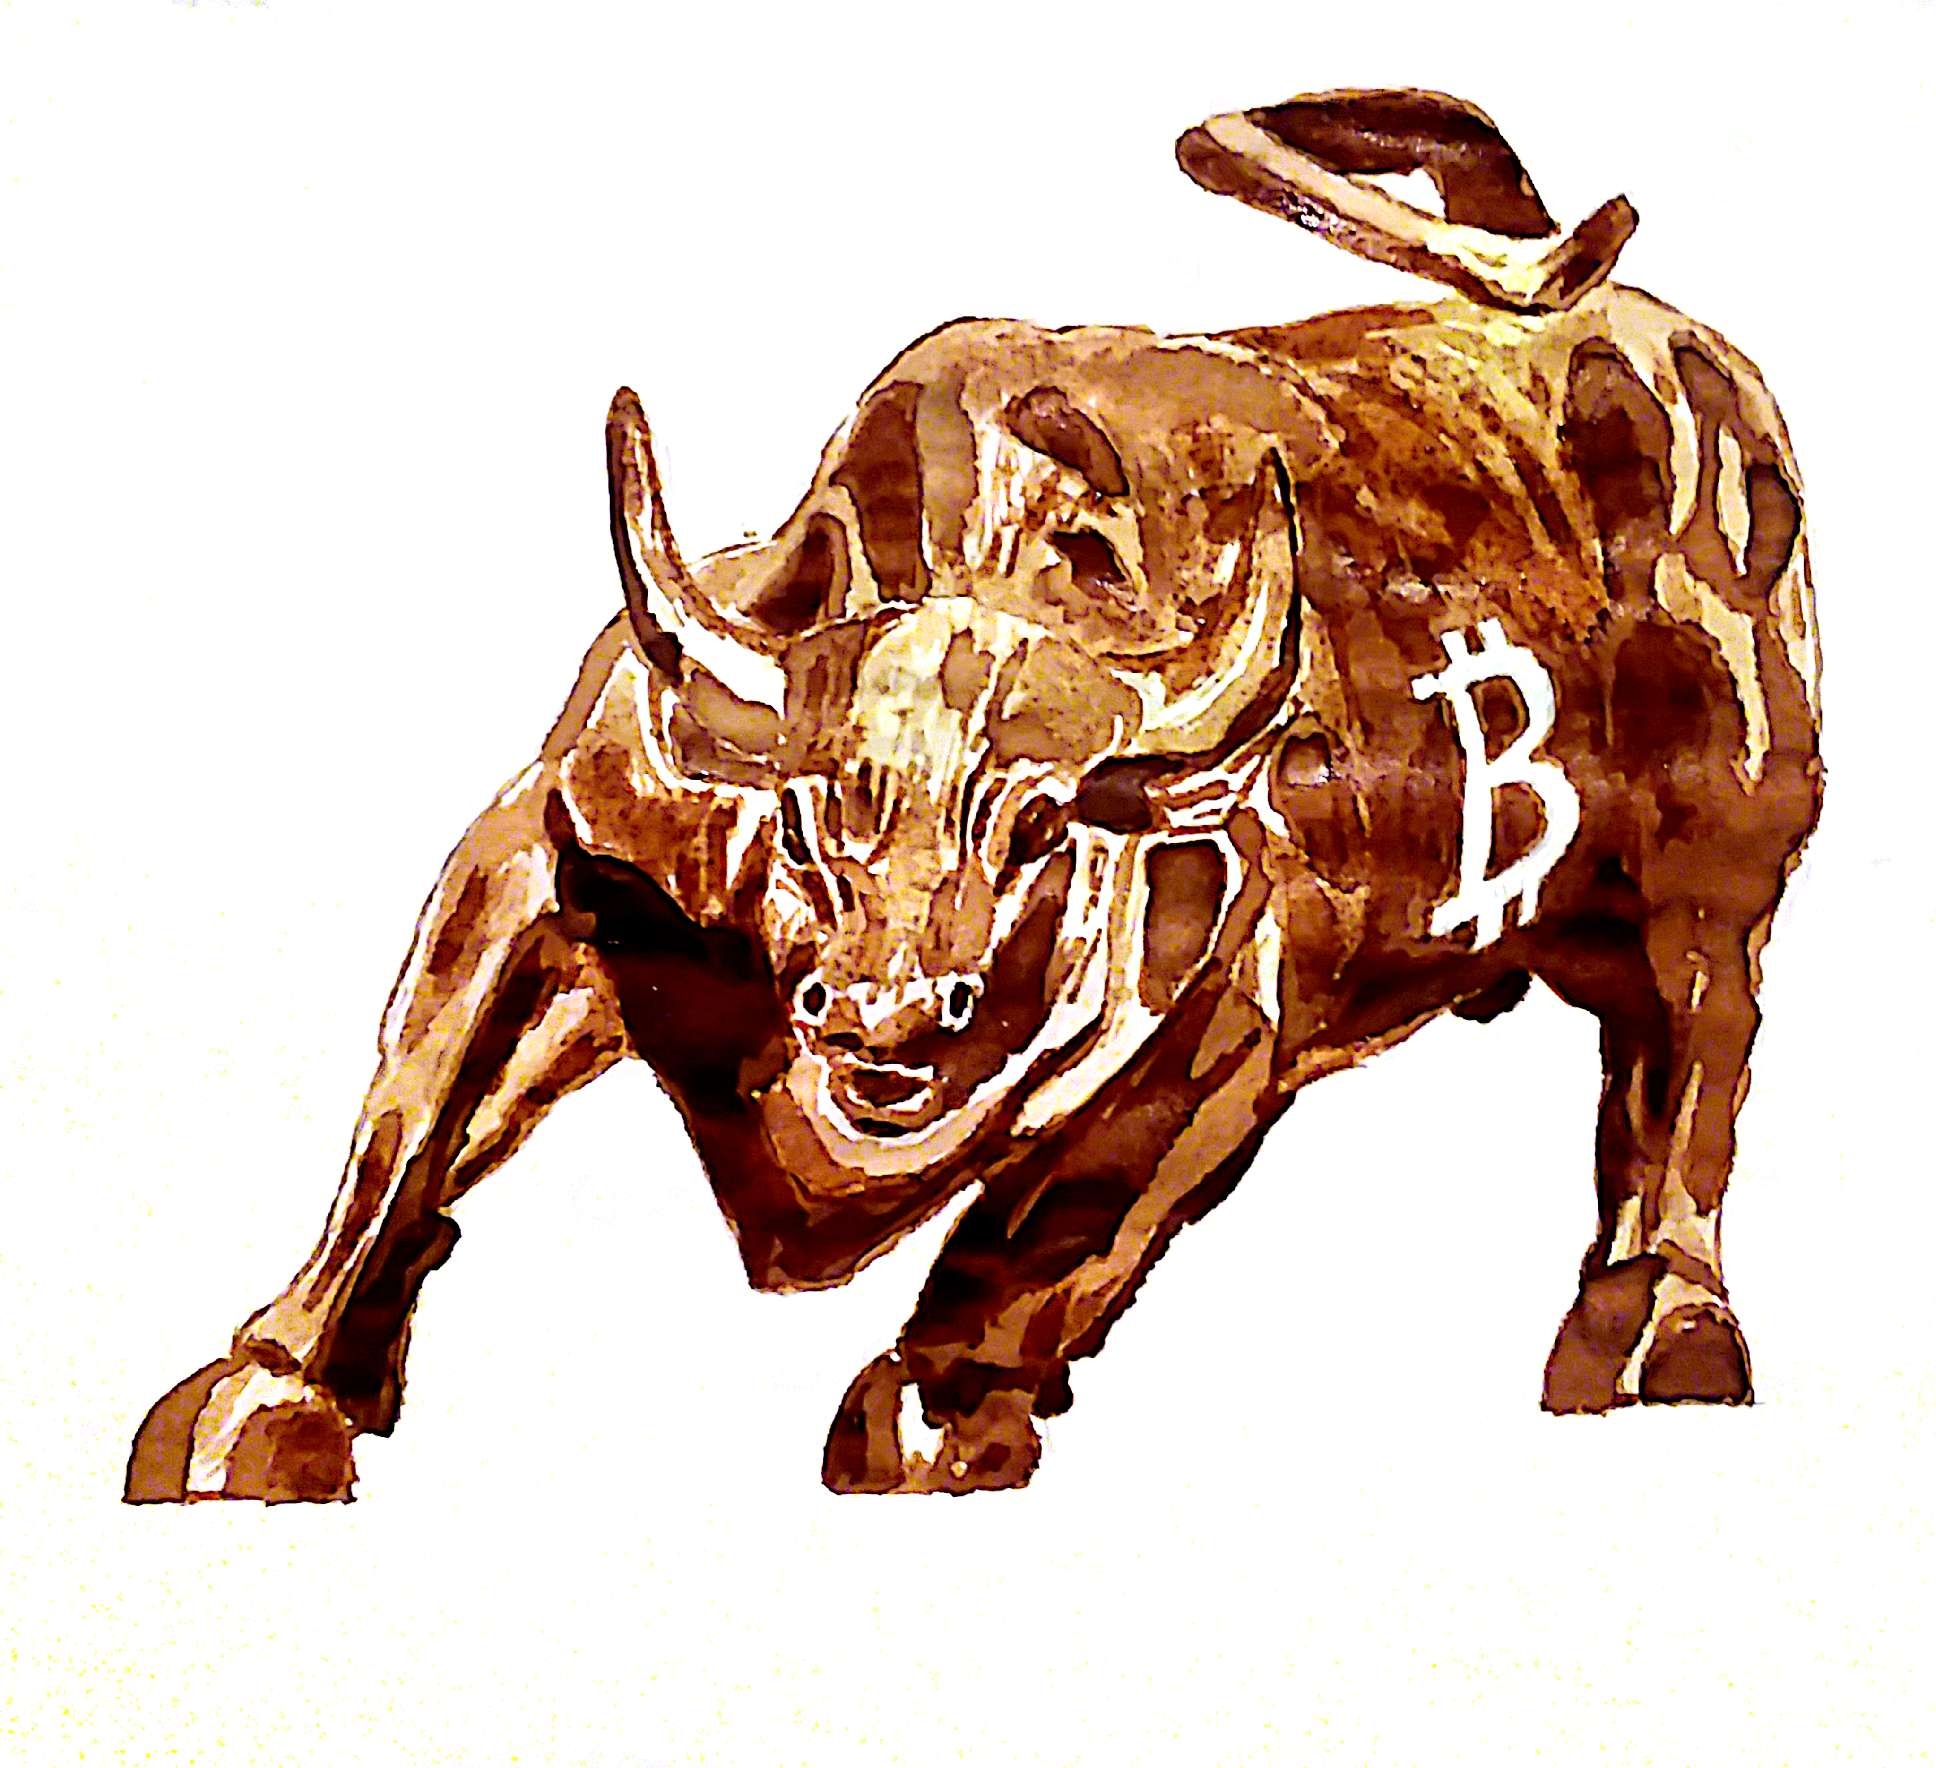 Bitcoin's Bull Market Continues With a New All-Time High ...